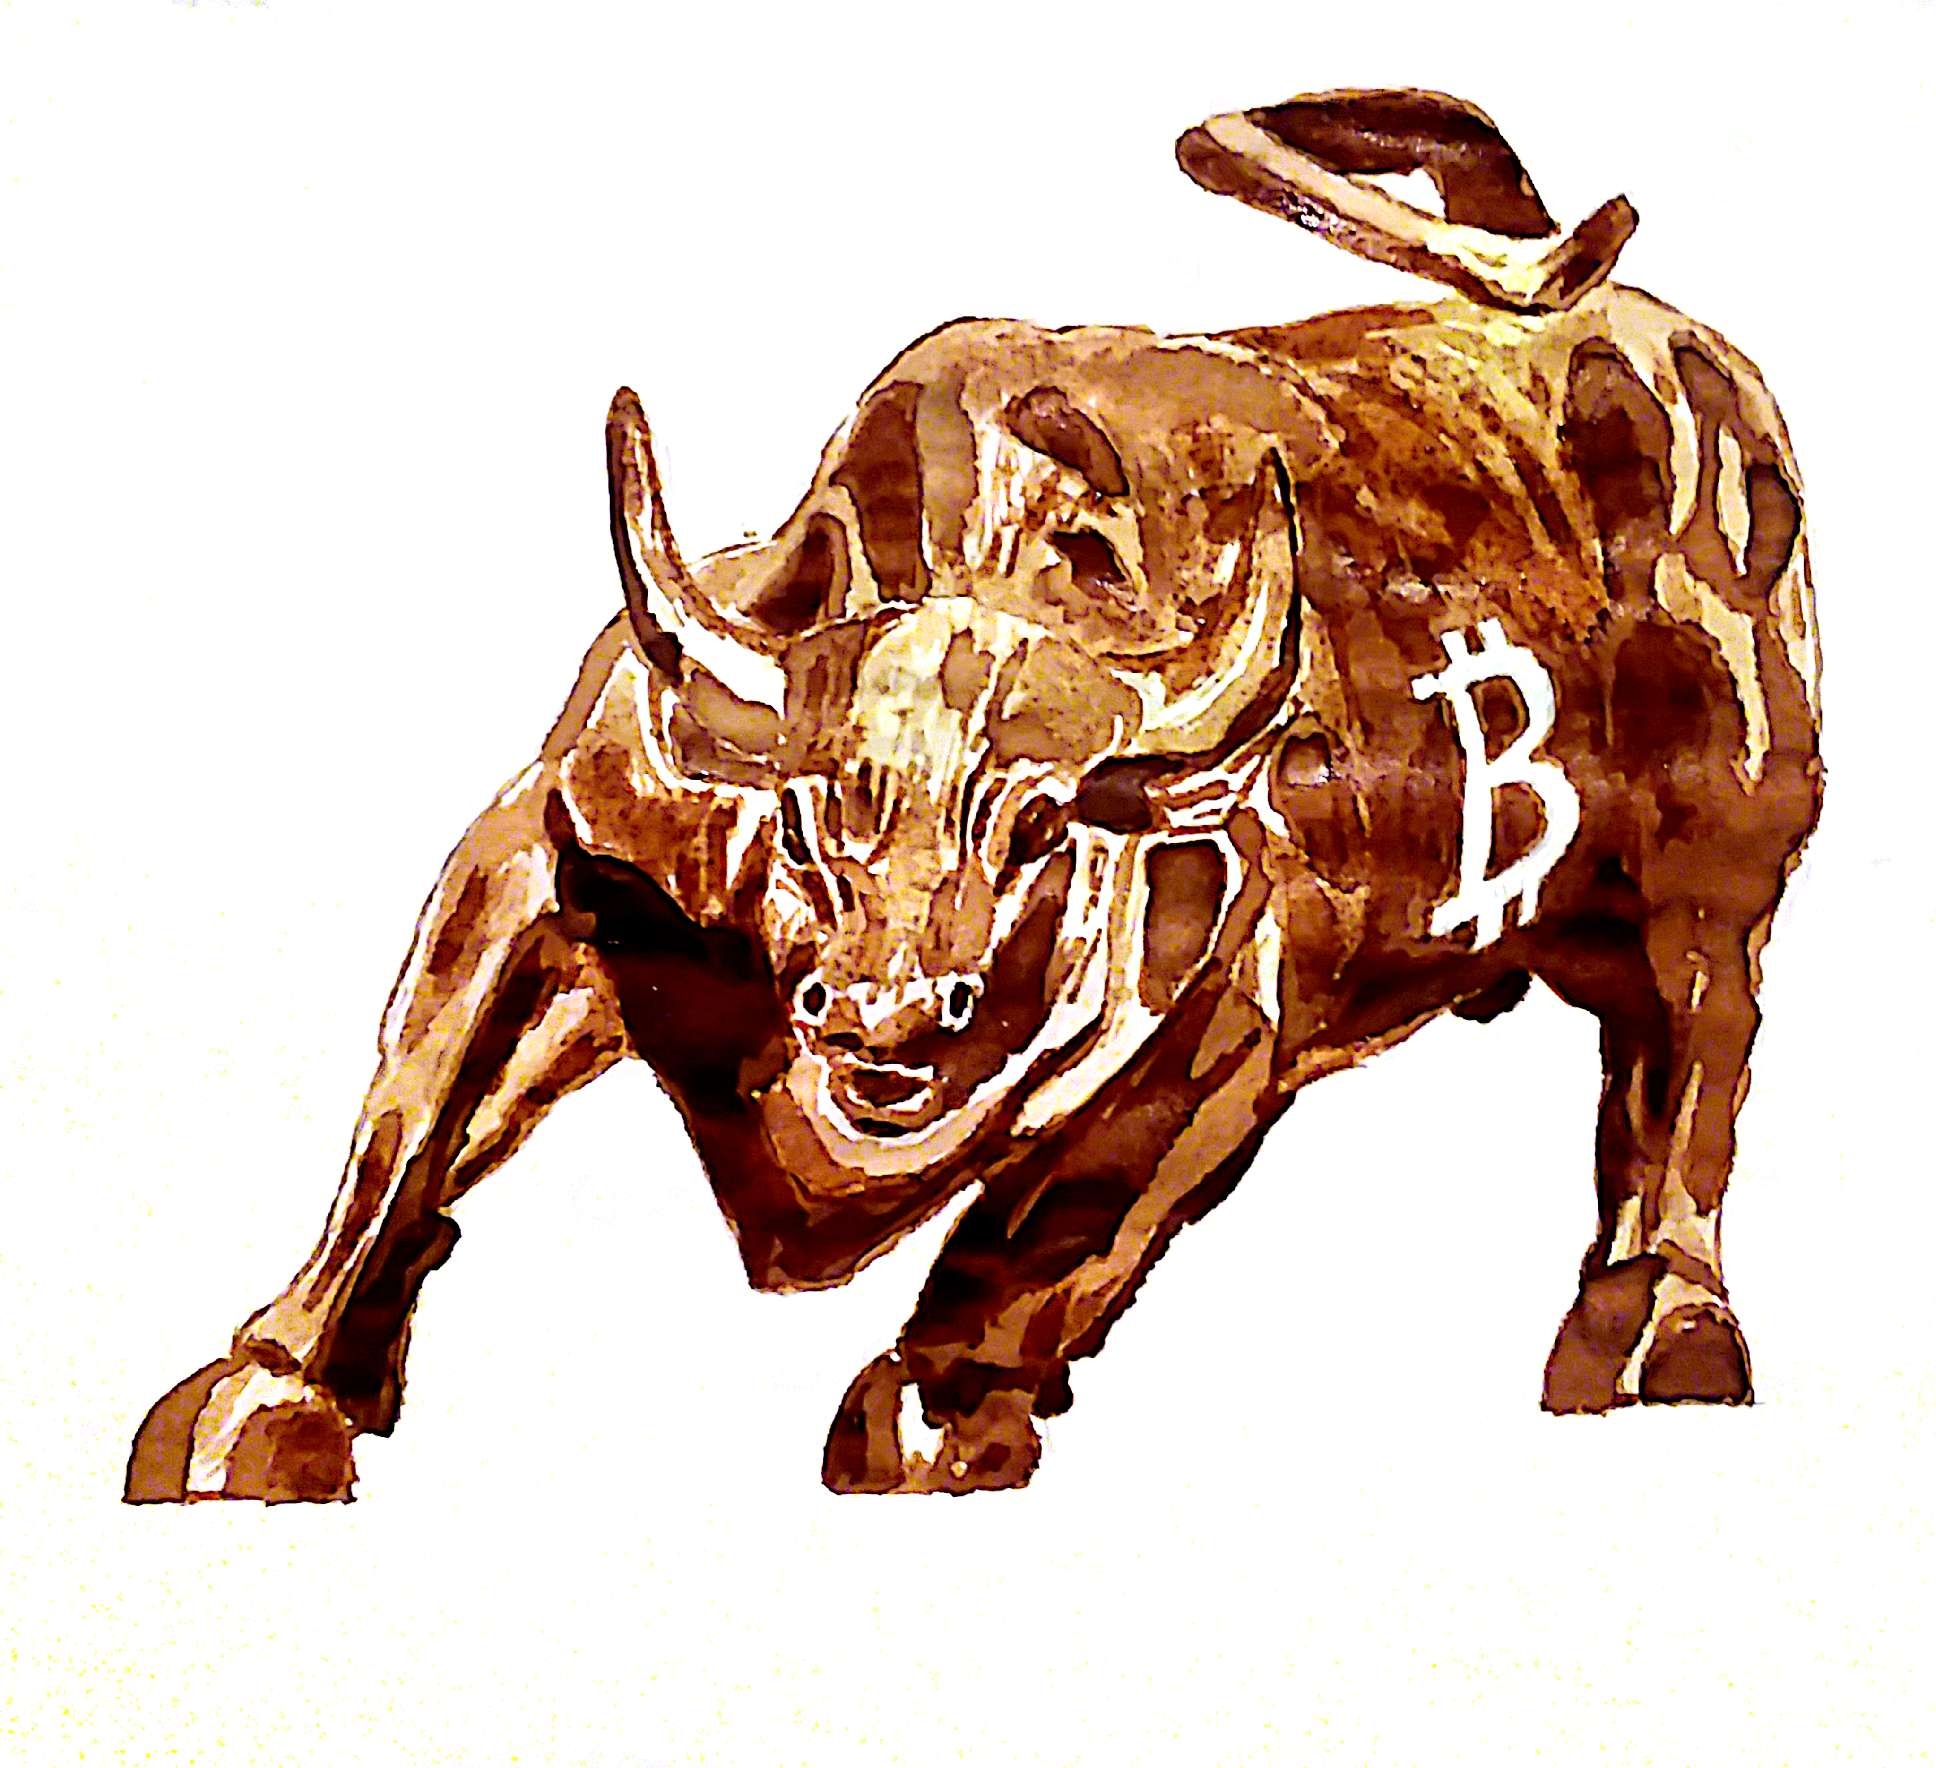 Bitcoin's Bull Market Continues With a New All-Time High ...